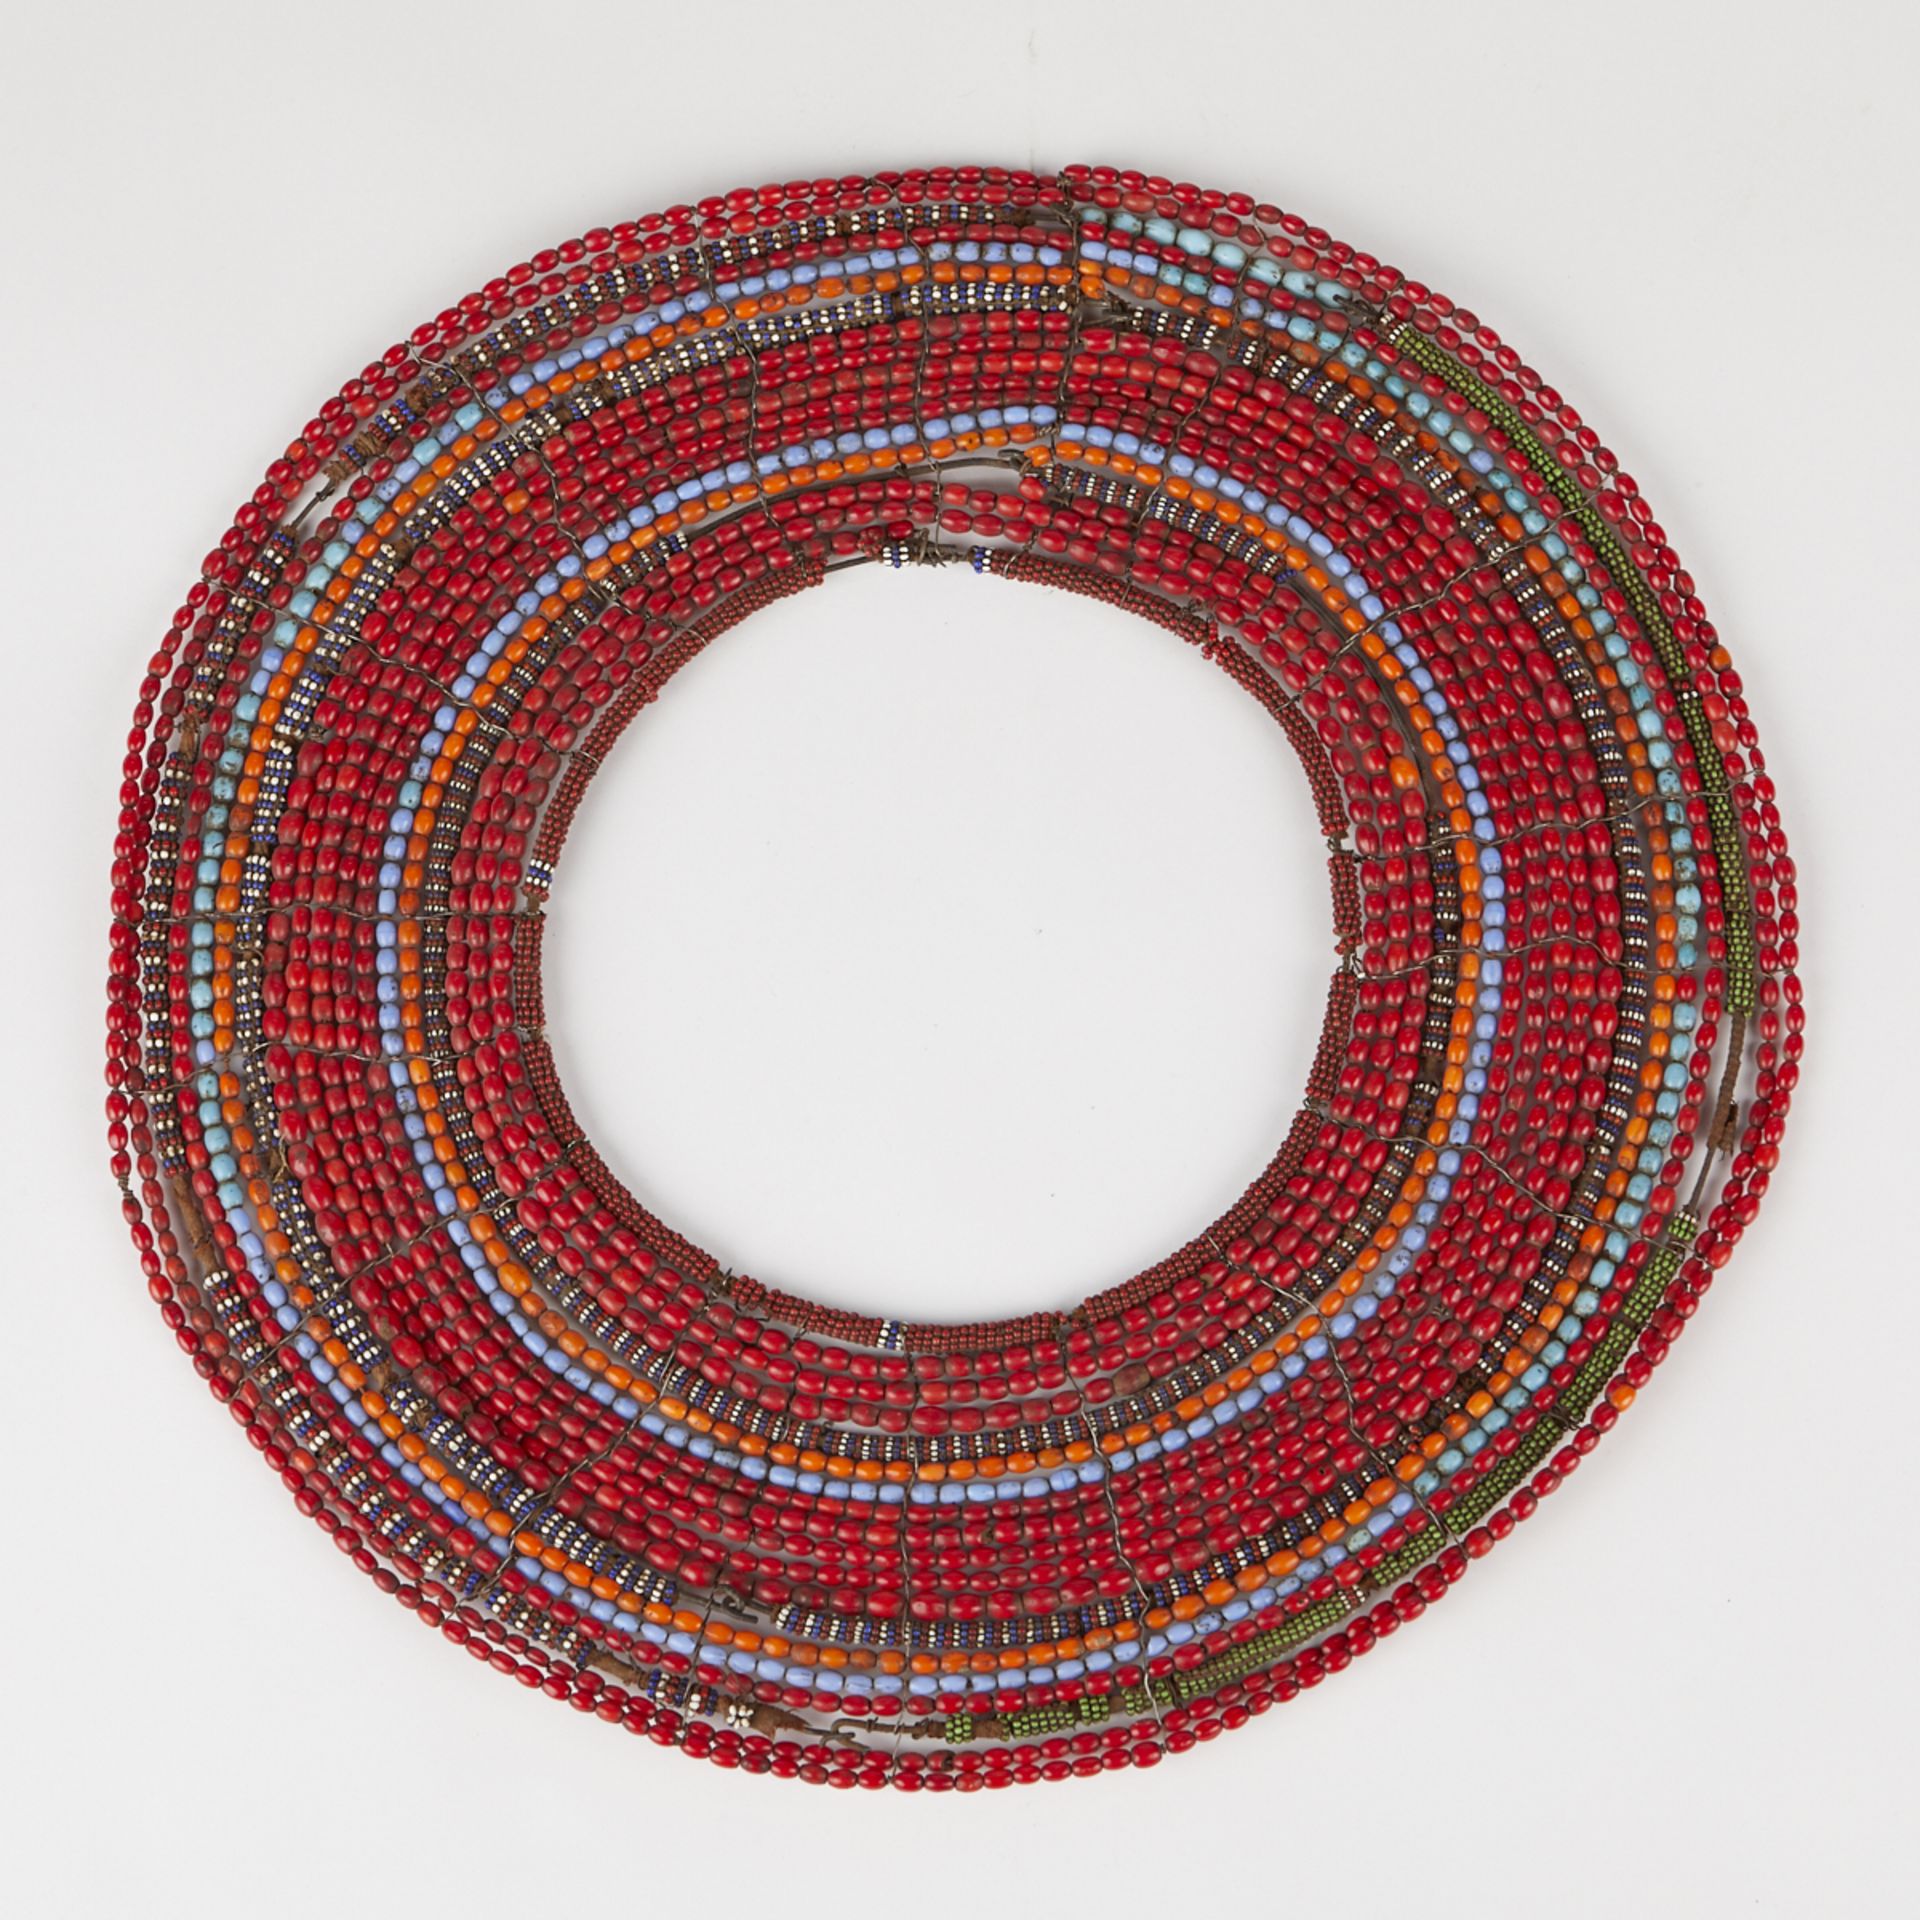 3 Collar Necklaces - 2 African and 1 New Guinea - Image 3 of 10